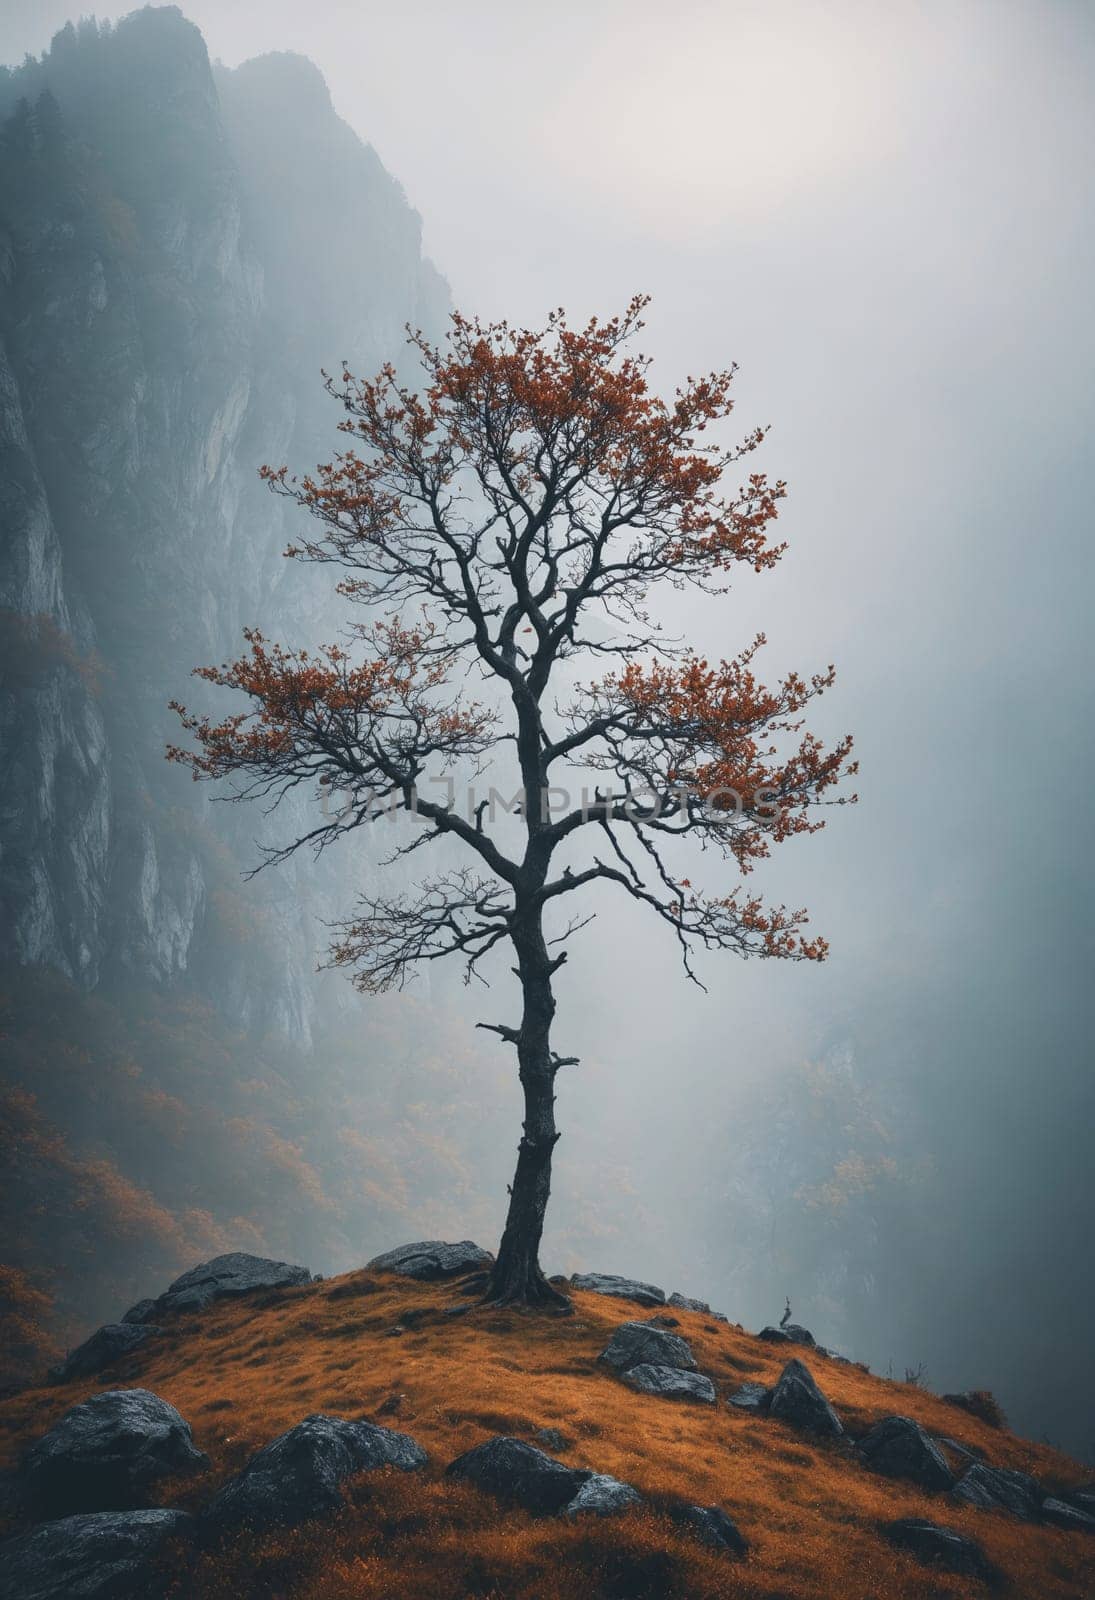 A lone larch tree stands tall in the foggy forest, surrounded by evergreen mountains, creating an atmospheric phenomenon in this natural landscape biome